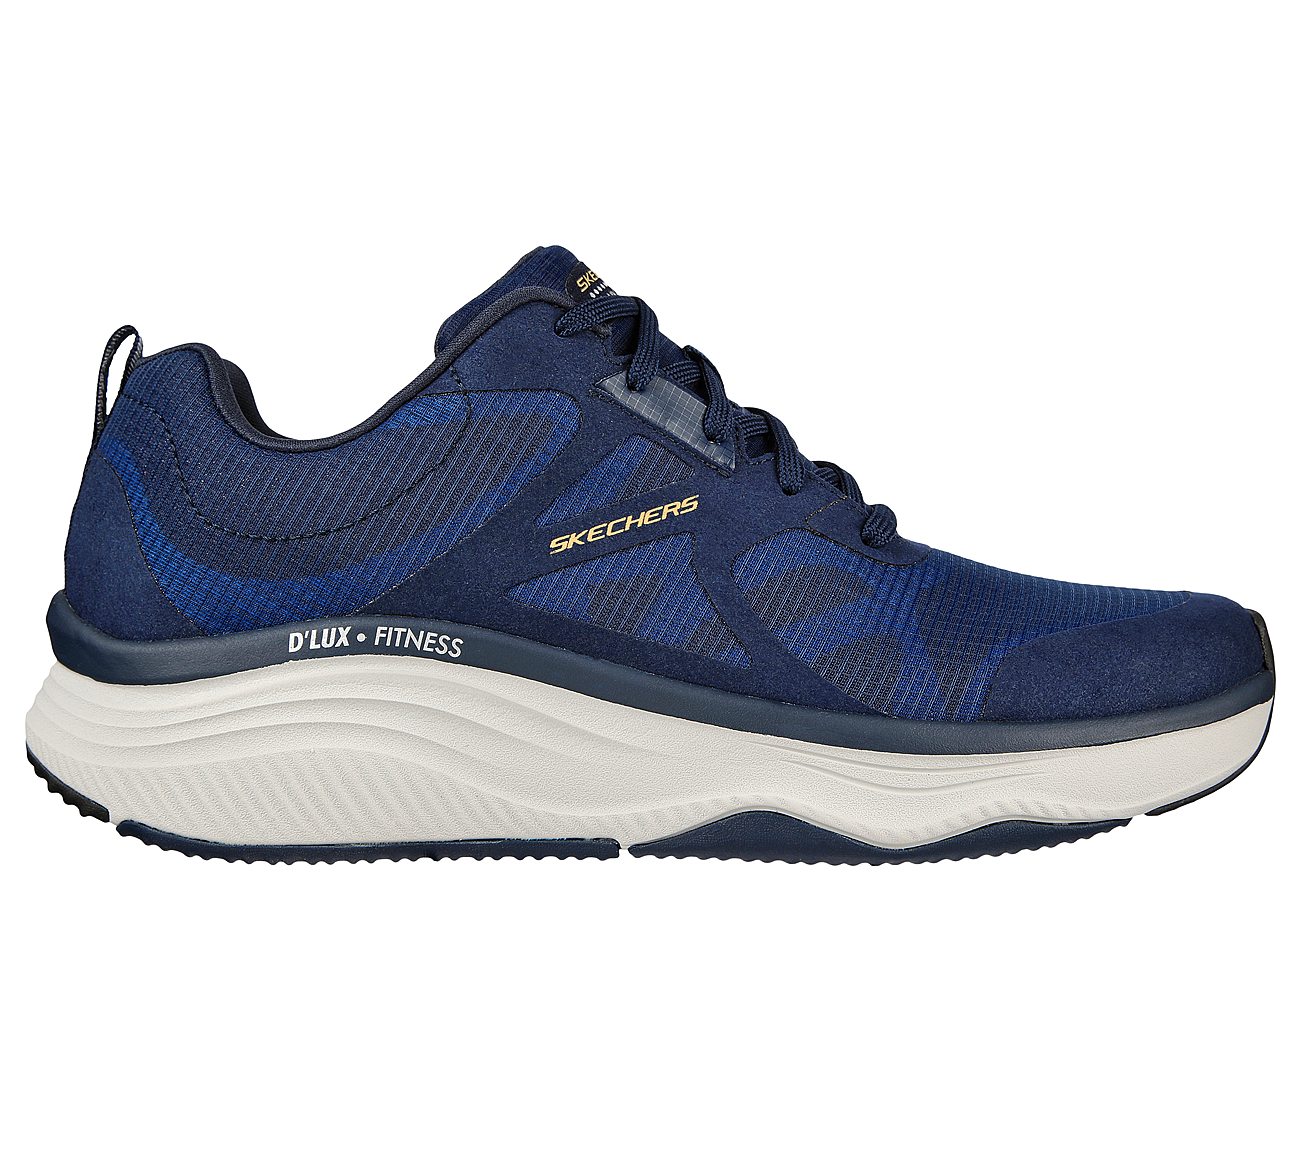  D'LUX FITNESS-BOX JUMP, NAVY/BLUE Footwear Lateral View